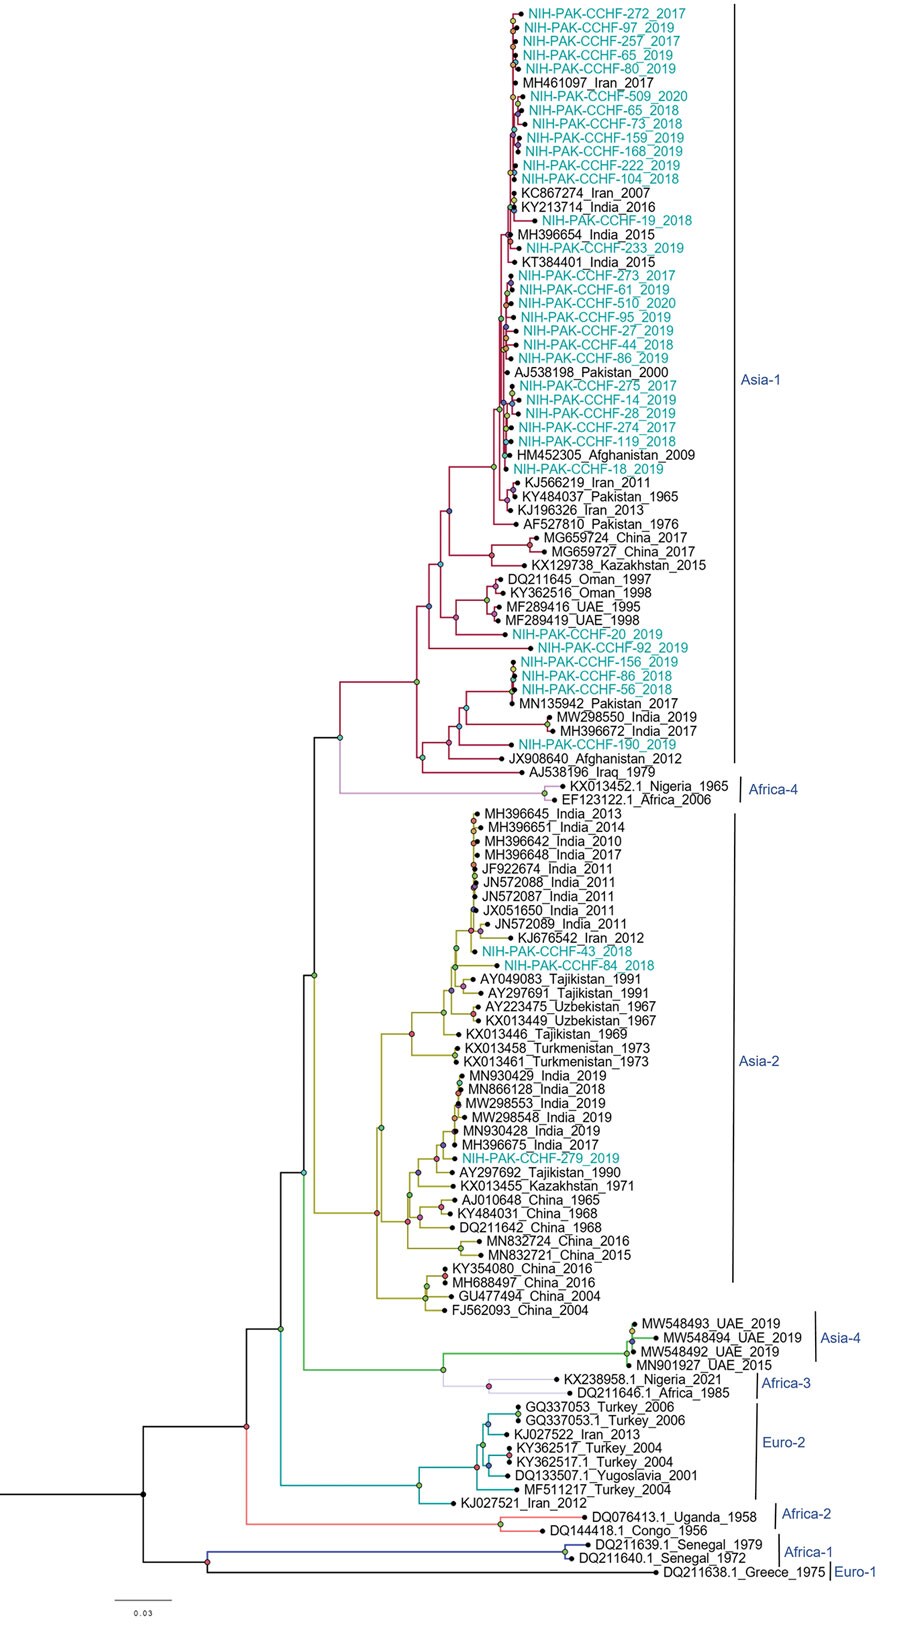 Phylogenetic analysis of full-length small gene segments of Crimean-Congo hemorrhagic fever virus in study of virus diversity and reassortment, Pakistan, 2017–2020. Midpoint-rooted trees were generated by using the maximum-likelihood method. Blue-green text indicates sequences from this study, which clustered with the Asia-1 and Asia-2 genotypes. Scale bar indicates nucleotide substitutions per site.